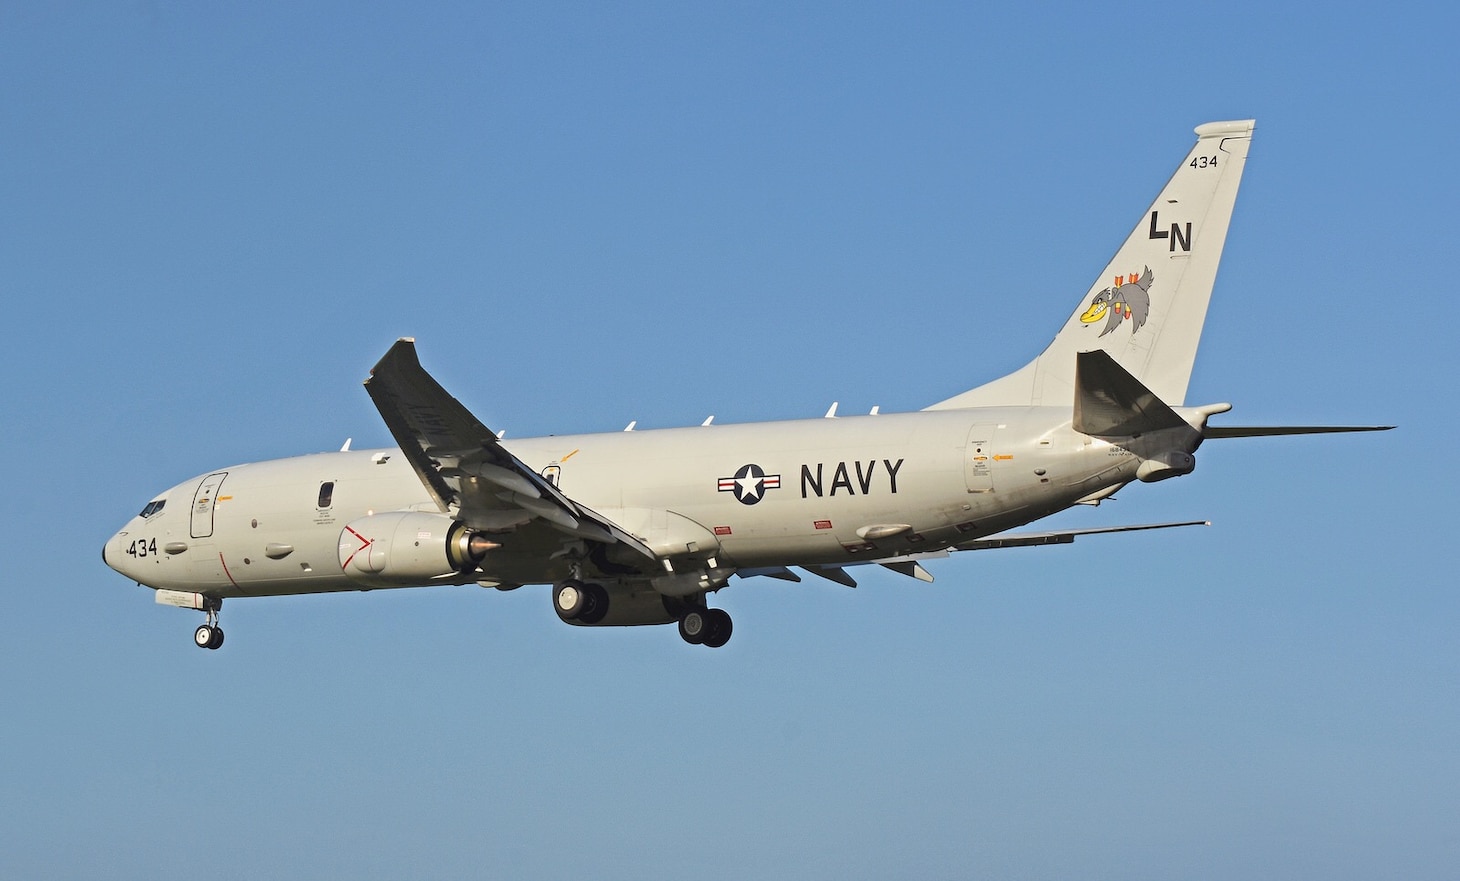 Official U.S. Navy file photo of a P-8A Poseidon aircraft from Patrol Squadron (VP) 45.